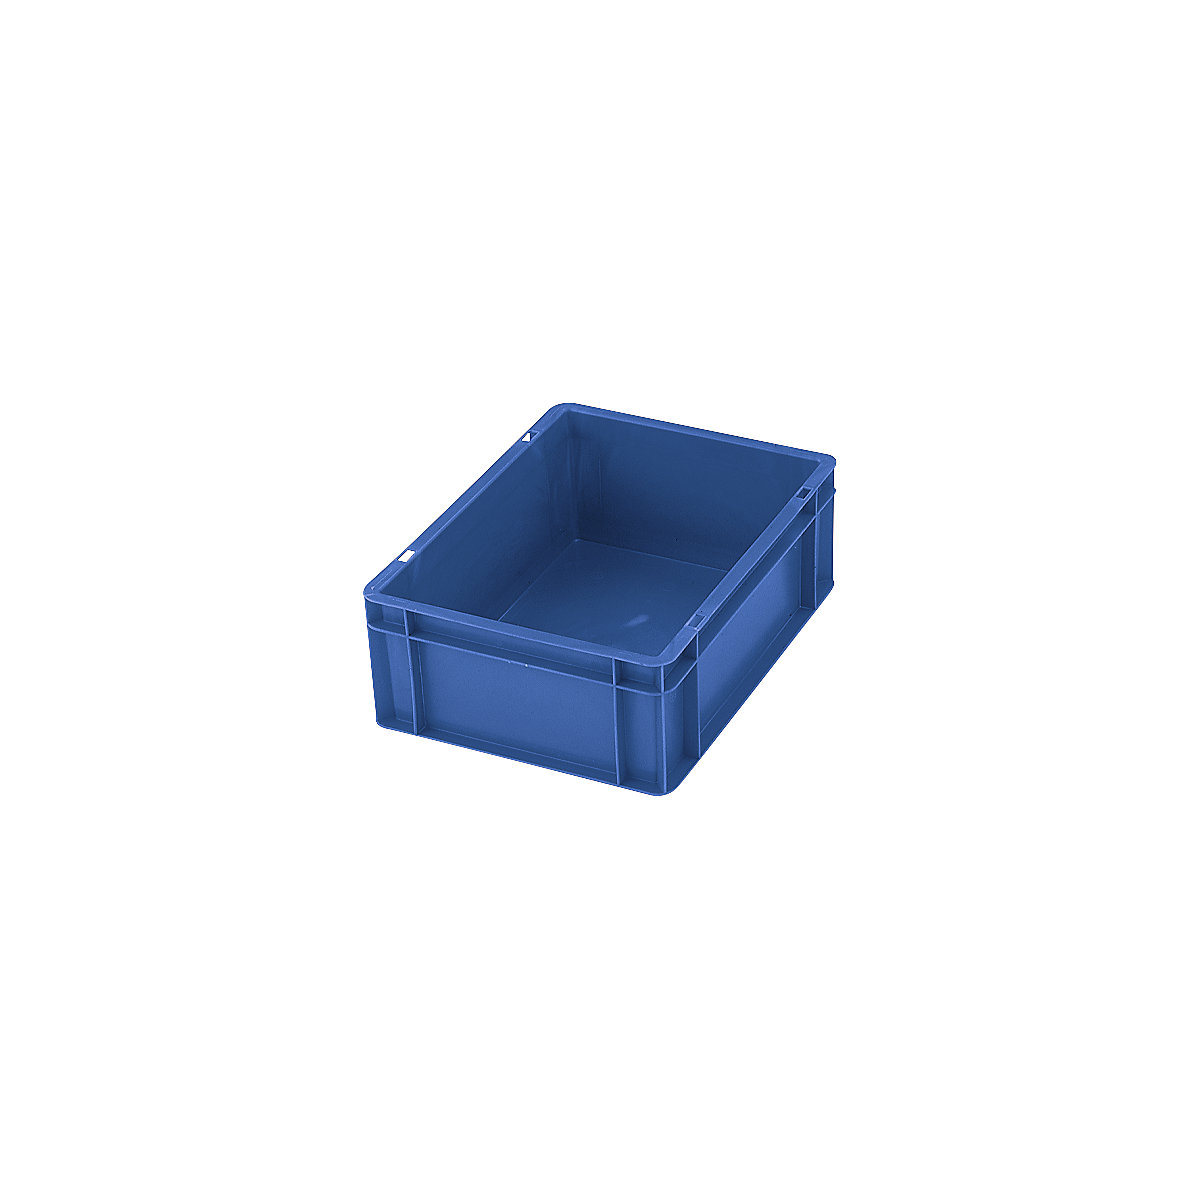 Euro stacking container, closed walls and base, LxWxH 600 x 400 x 75 mm, blue, pack of 5-7